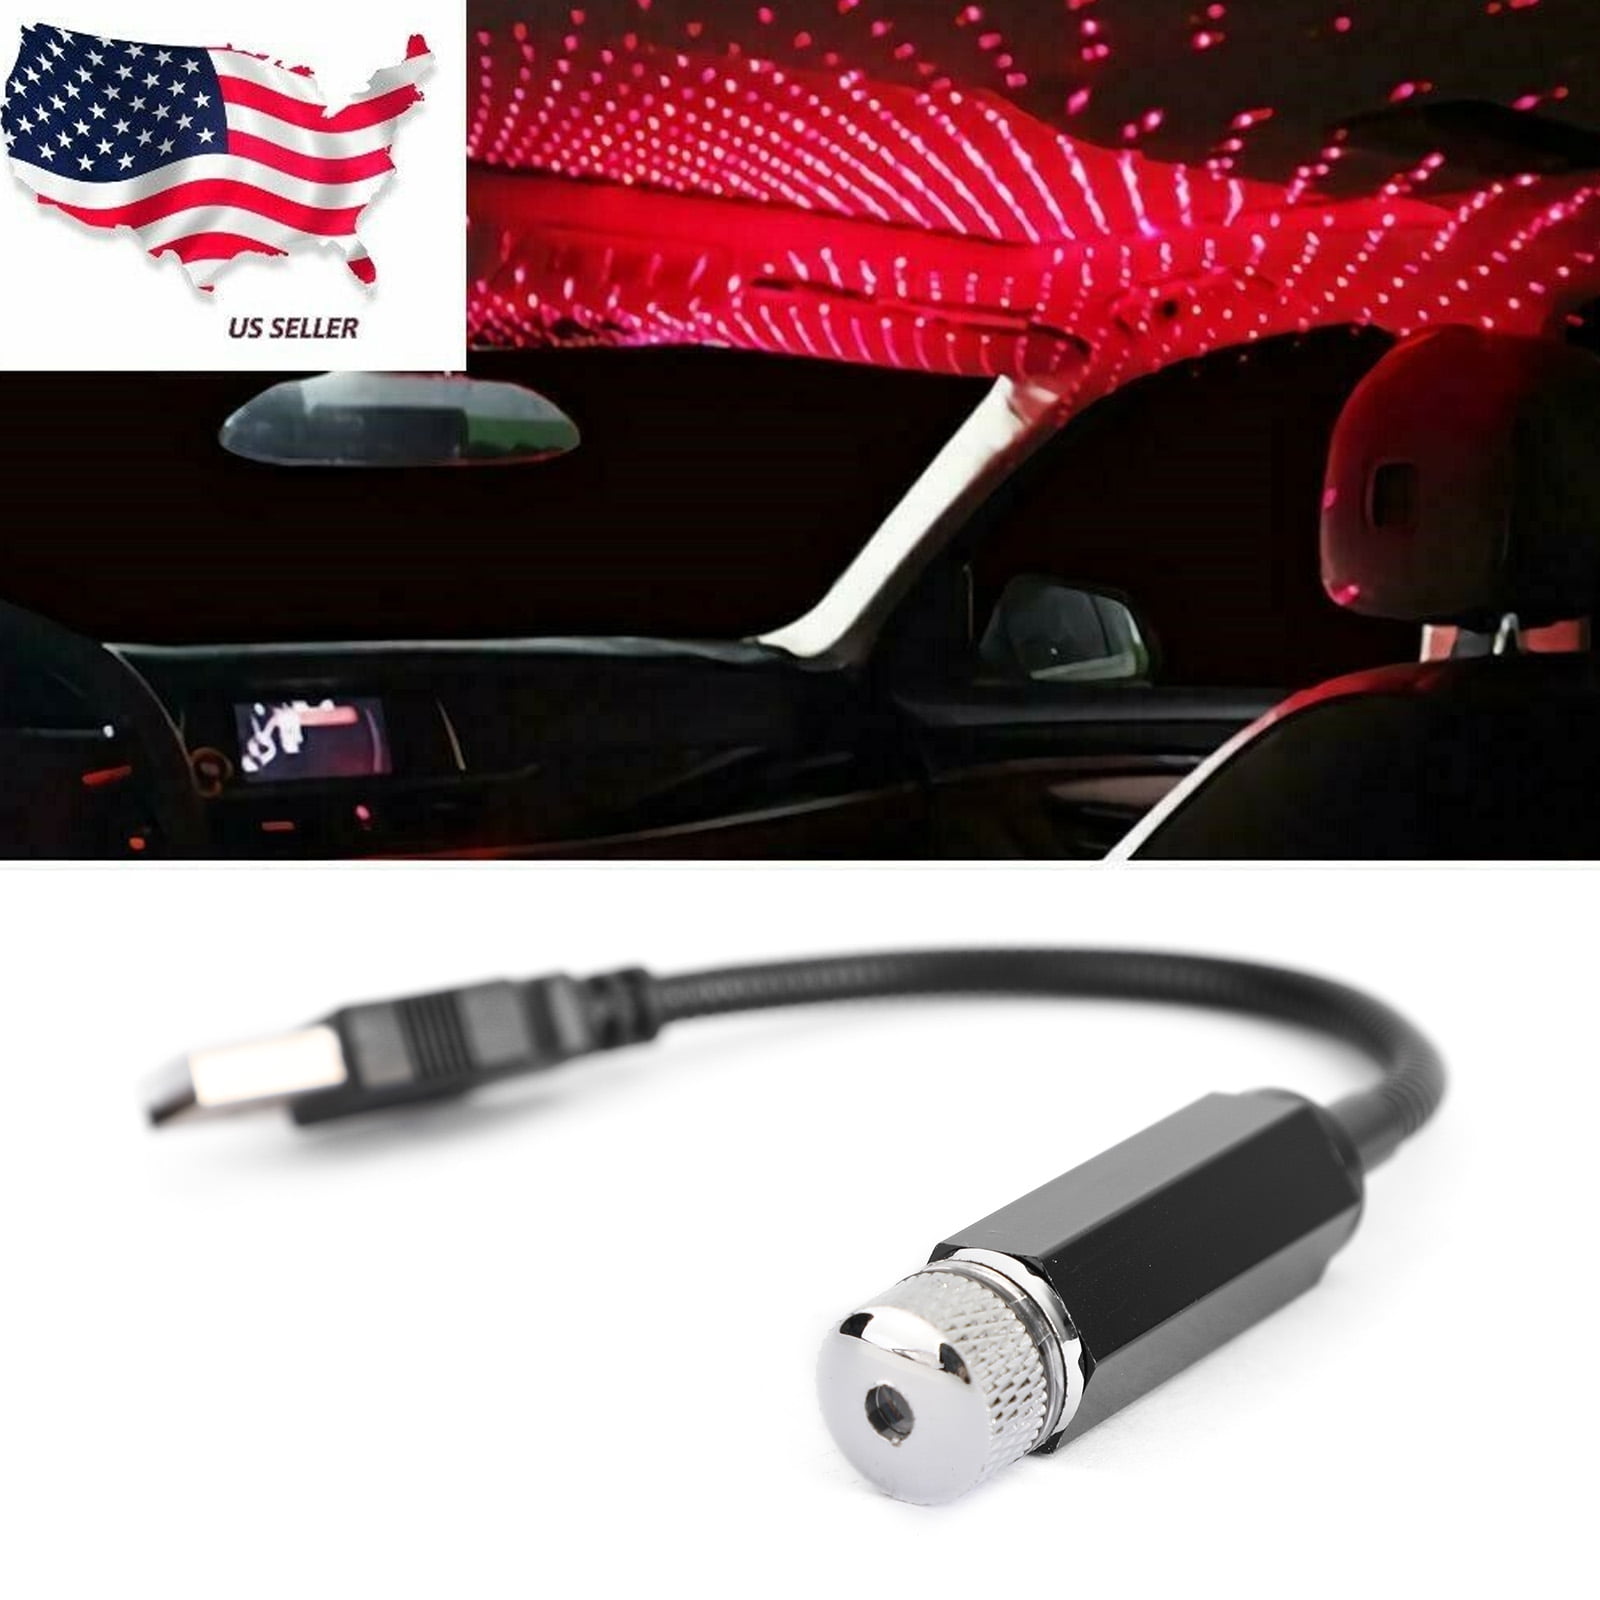 USB Car Interior Atmosphere Starry Sky Lamp Ambient Star Light LED Projector US 